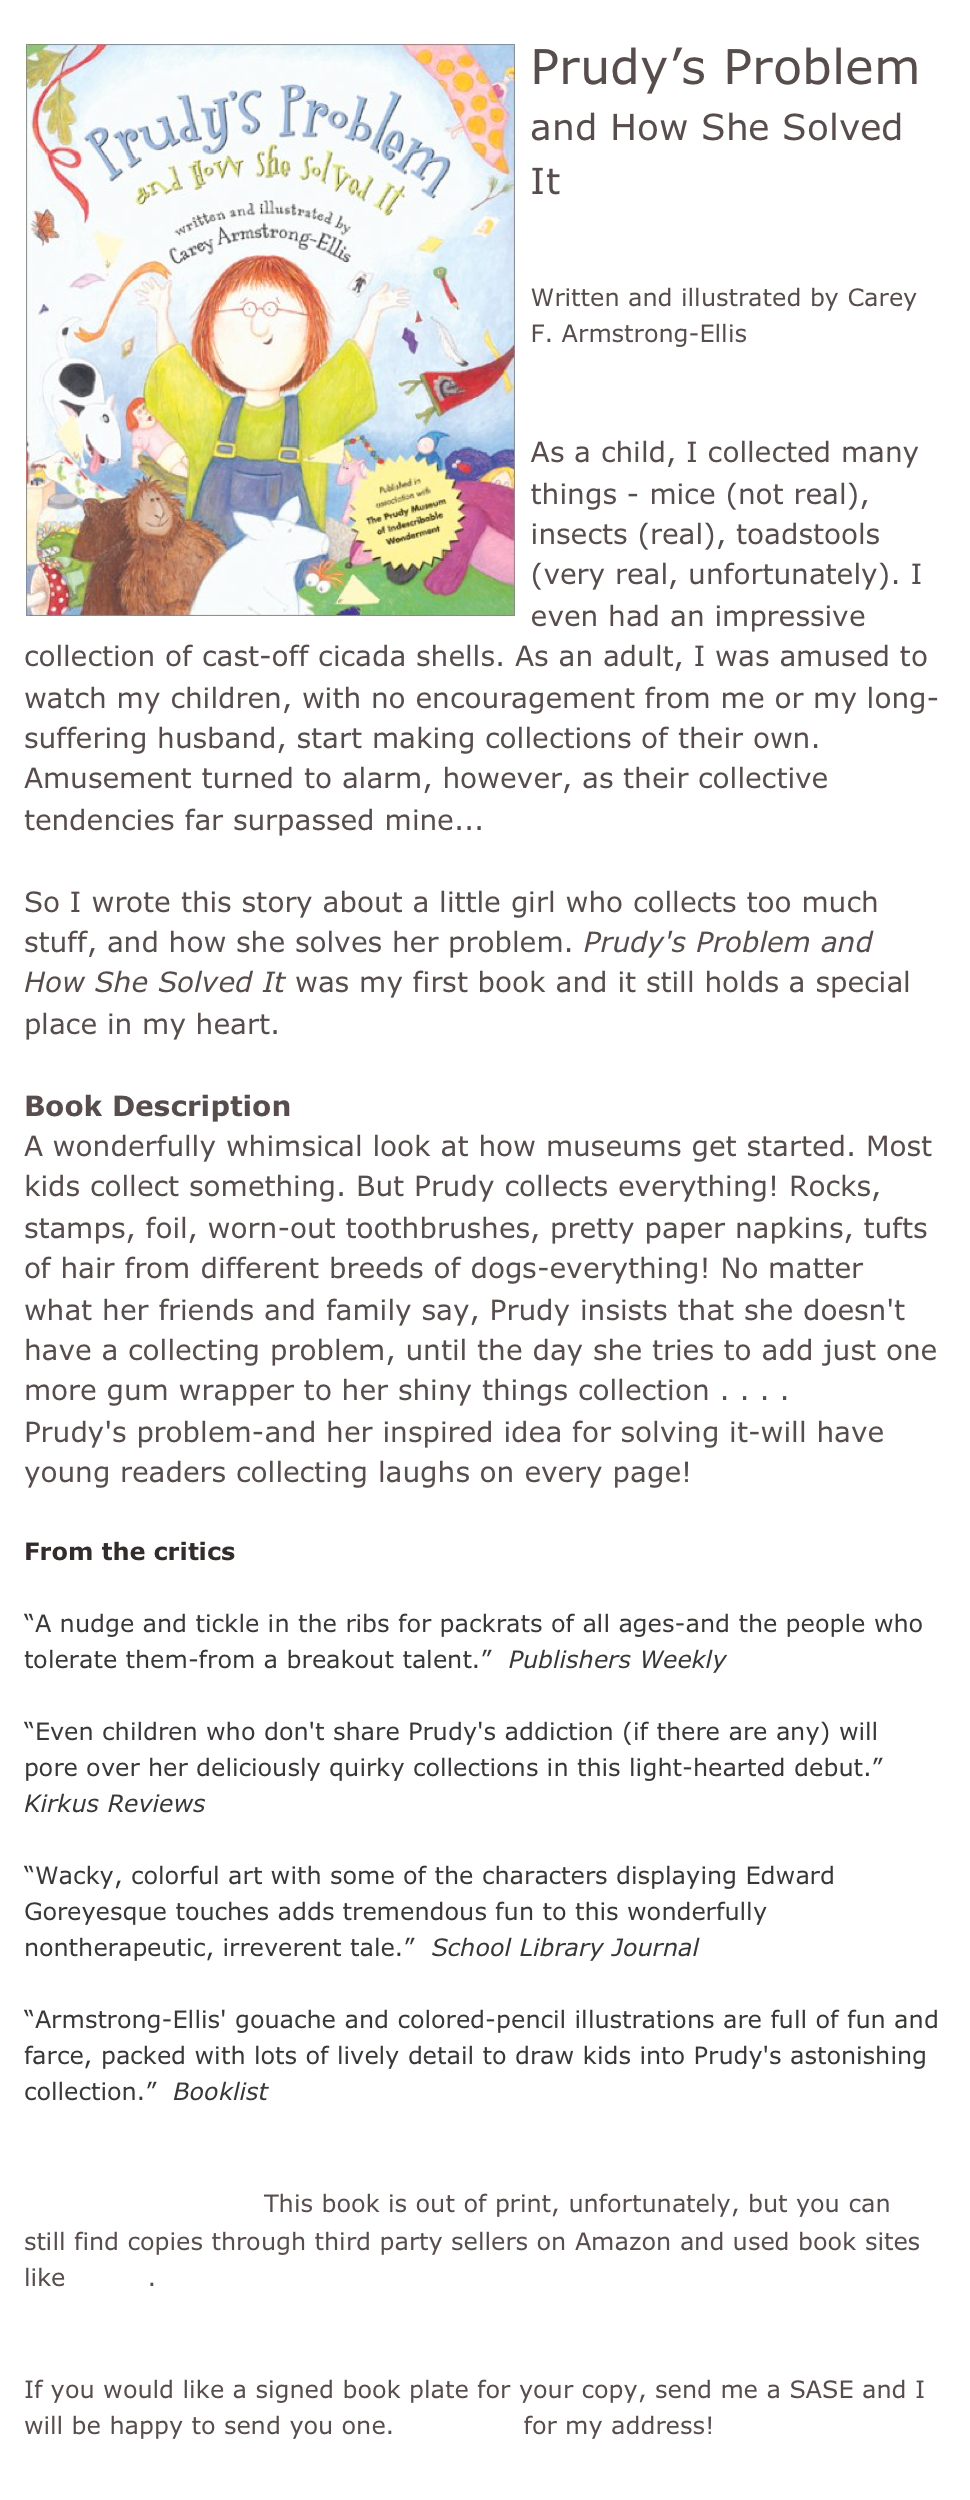 ￼Prudy’s Problem
and How She Solved It


Written and illustrated by Carey F. Armstrong-Ellis


As a child, I collected many things - mice (not real), insects (real), toadstools (very real, unfortunately). I even had an impressive collection of cast-off cicada shells. As an adult, I was amused to watch my children, with no encouragement from me or my long-suffering husband, start making collections of their own. Amusement turned to alarm, however, as their collective tendencies far surpassed mine...

So I wrote this story about a little girl who collects too much stuff, and how she solves her problem. Prudy's Problem and How She Solved It was my first book and it still holds a special place in my heart.

Book Description 
A wonderfully whimsical look at how museums get started. Most kids collect something. But Prudy collects everything! Rocks, stamps, foil, worn-out toothbrushes, pretty paper napkins, tufts of hair from different breeds of dogs-everything! No matter what her friends and family say, Prudy insists that she doesn't have a collecting problem, until the day she tries to add just one more gum wrapper to her shiny things collection . . . .
Prudy's problem-and her inspired idea for solving it-will have young readers collecting laughs on every page!
  
From the critics 

“A nudge and tickle in the ribs for packrats of all ages-and the people who tolerate them-from a breakout talent.”  Publishers Weekly

“Even children who don't share Prudy's addiction (if there are any) will pore over her deliciously quirky collections in this light-hearted debut.”  Kirkus Reviews 

“Wacky, colorful art with some of the characters displaying Edward Goreyesque touches adds tremendous fun to this wonderfully nontherapeutic, irreverent tale.”  School Library Journal

“Armstrong-Ellis' gouache and colored-pencil illustrations are full of fun and farce, packed with lots of lively detail to draw kids into Prudy's astonishing collection.”  Booklist


*Buy this book!  This book is out of print, unfortunately, but you can still find copies through third party sellers on Amazon and used book sites like Alibris.


If you would like a signed book plate for your copy, send me a SASE and I will be happy to send you one. Email me for my address!
